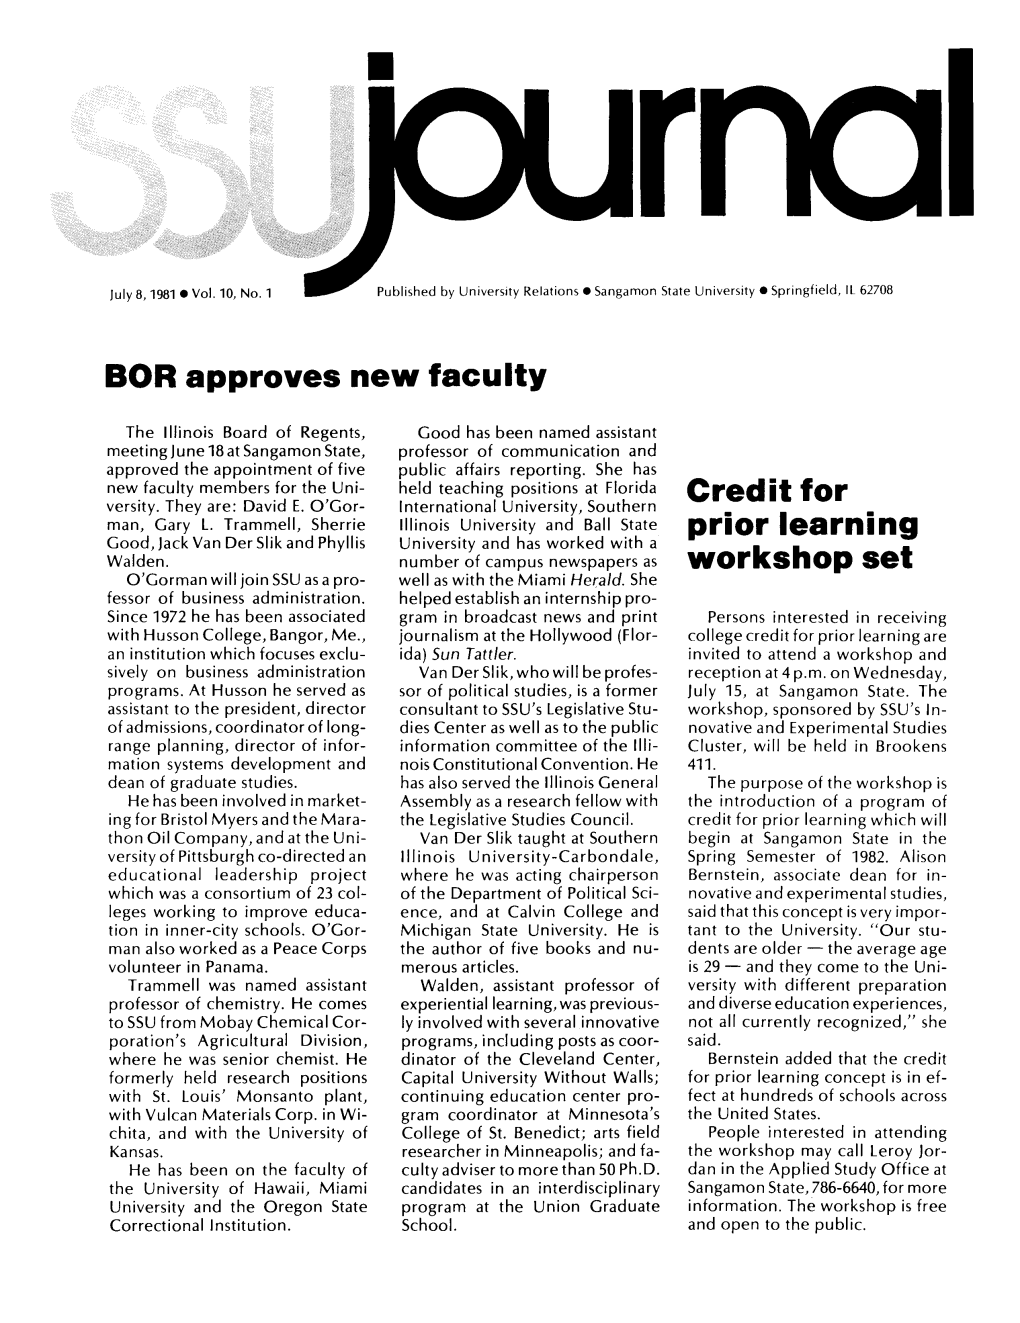 BOR Approves New Faculty Credit for Prior Learning Workshop